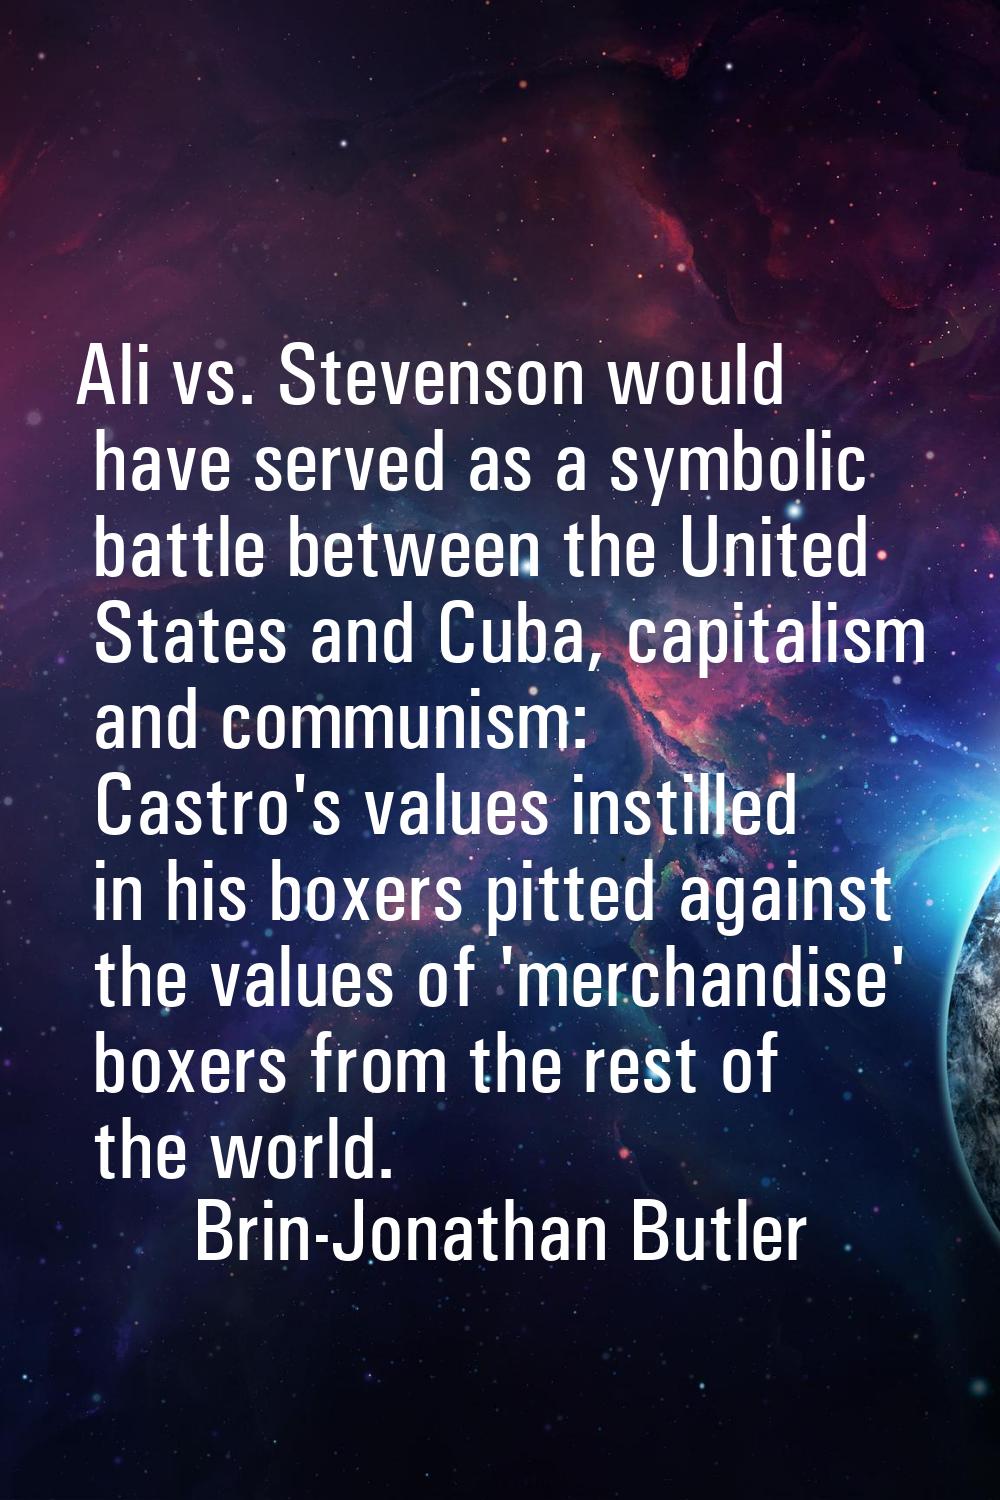 Ali vs. Stevenson would have served as a symbolic battle between the United States and Cuba, capita